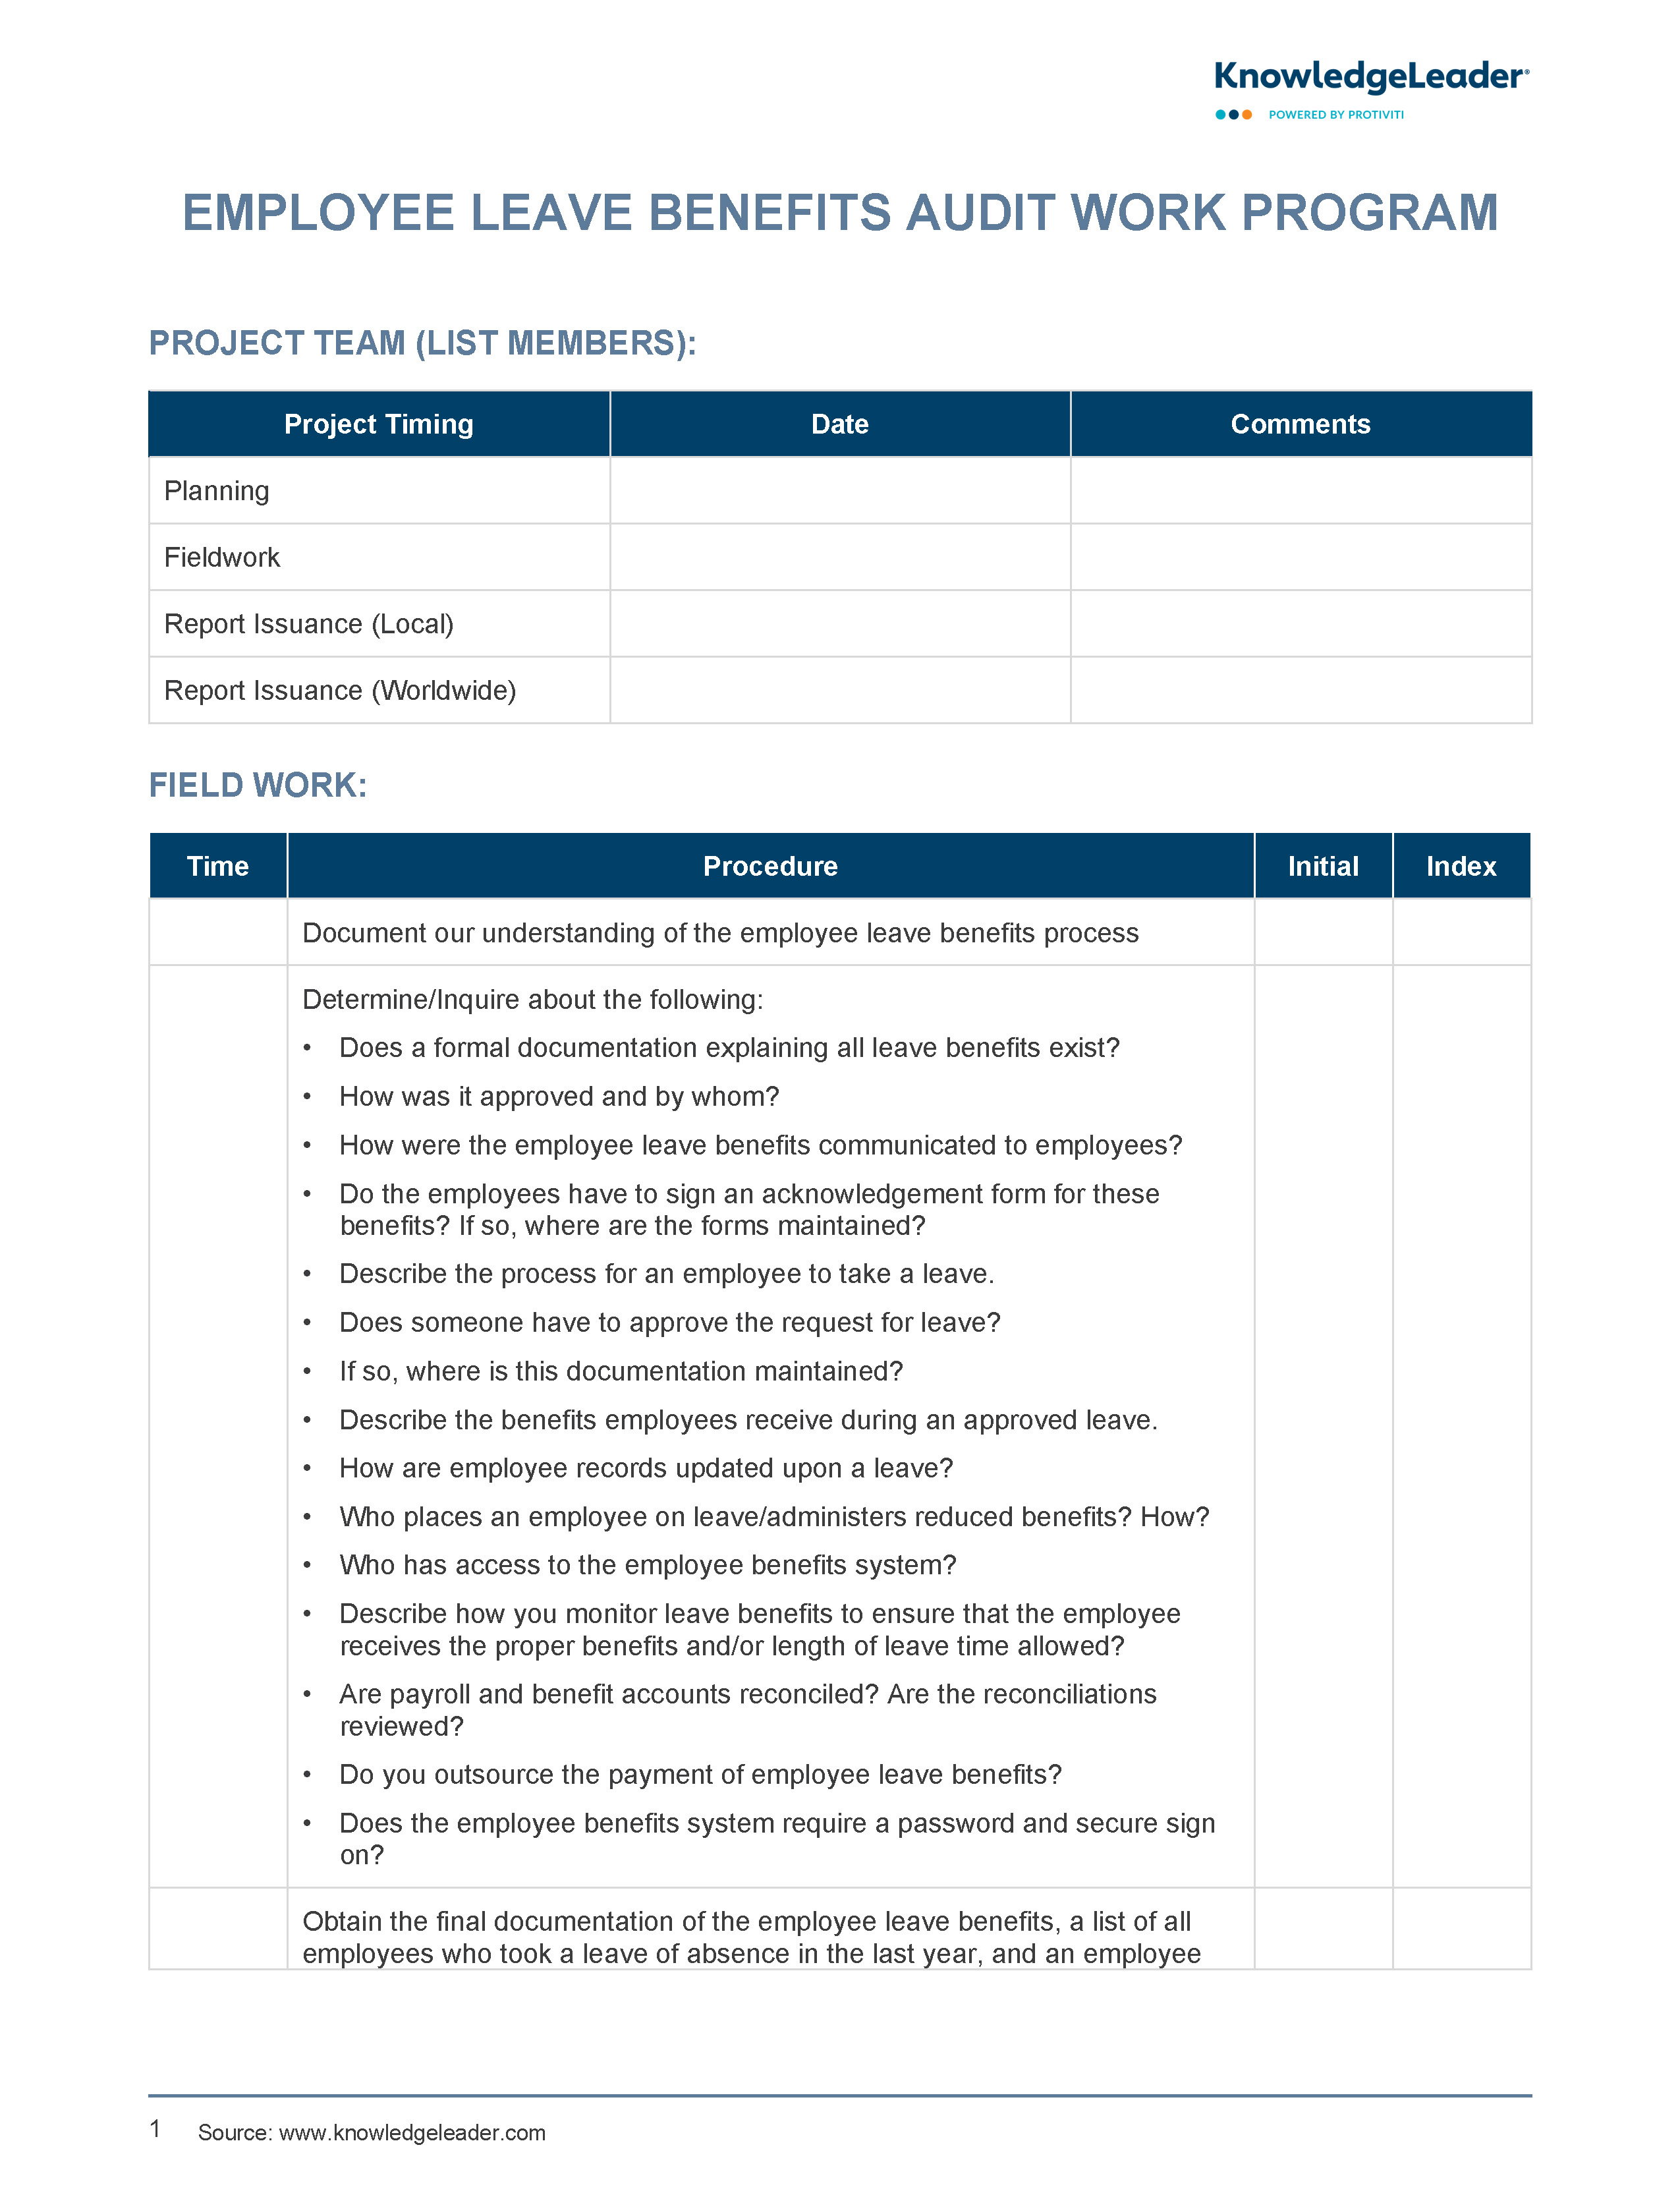 Screenshot of the first page of Employee Leave Benefits Audit Work Program